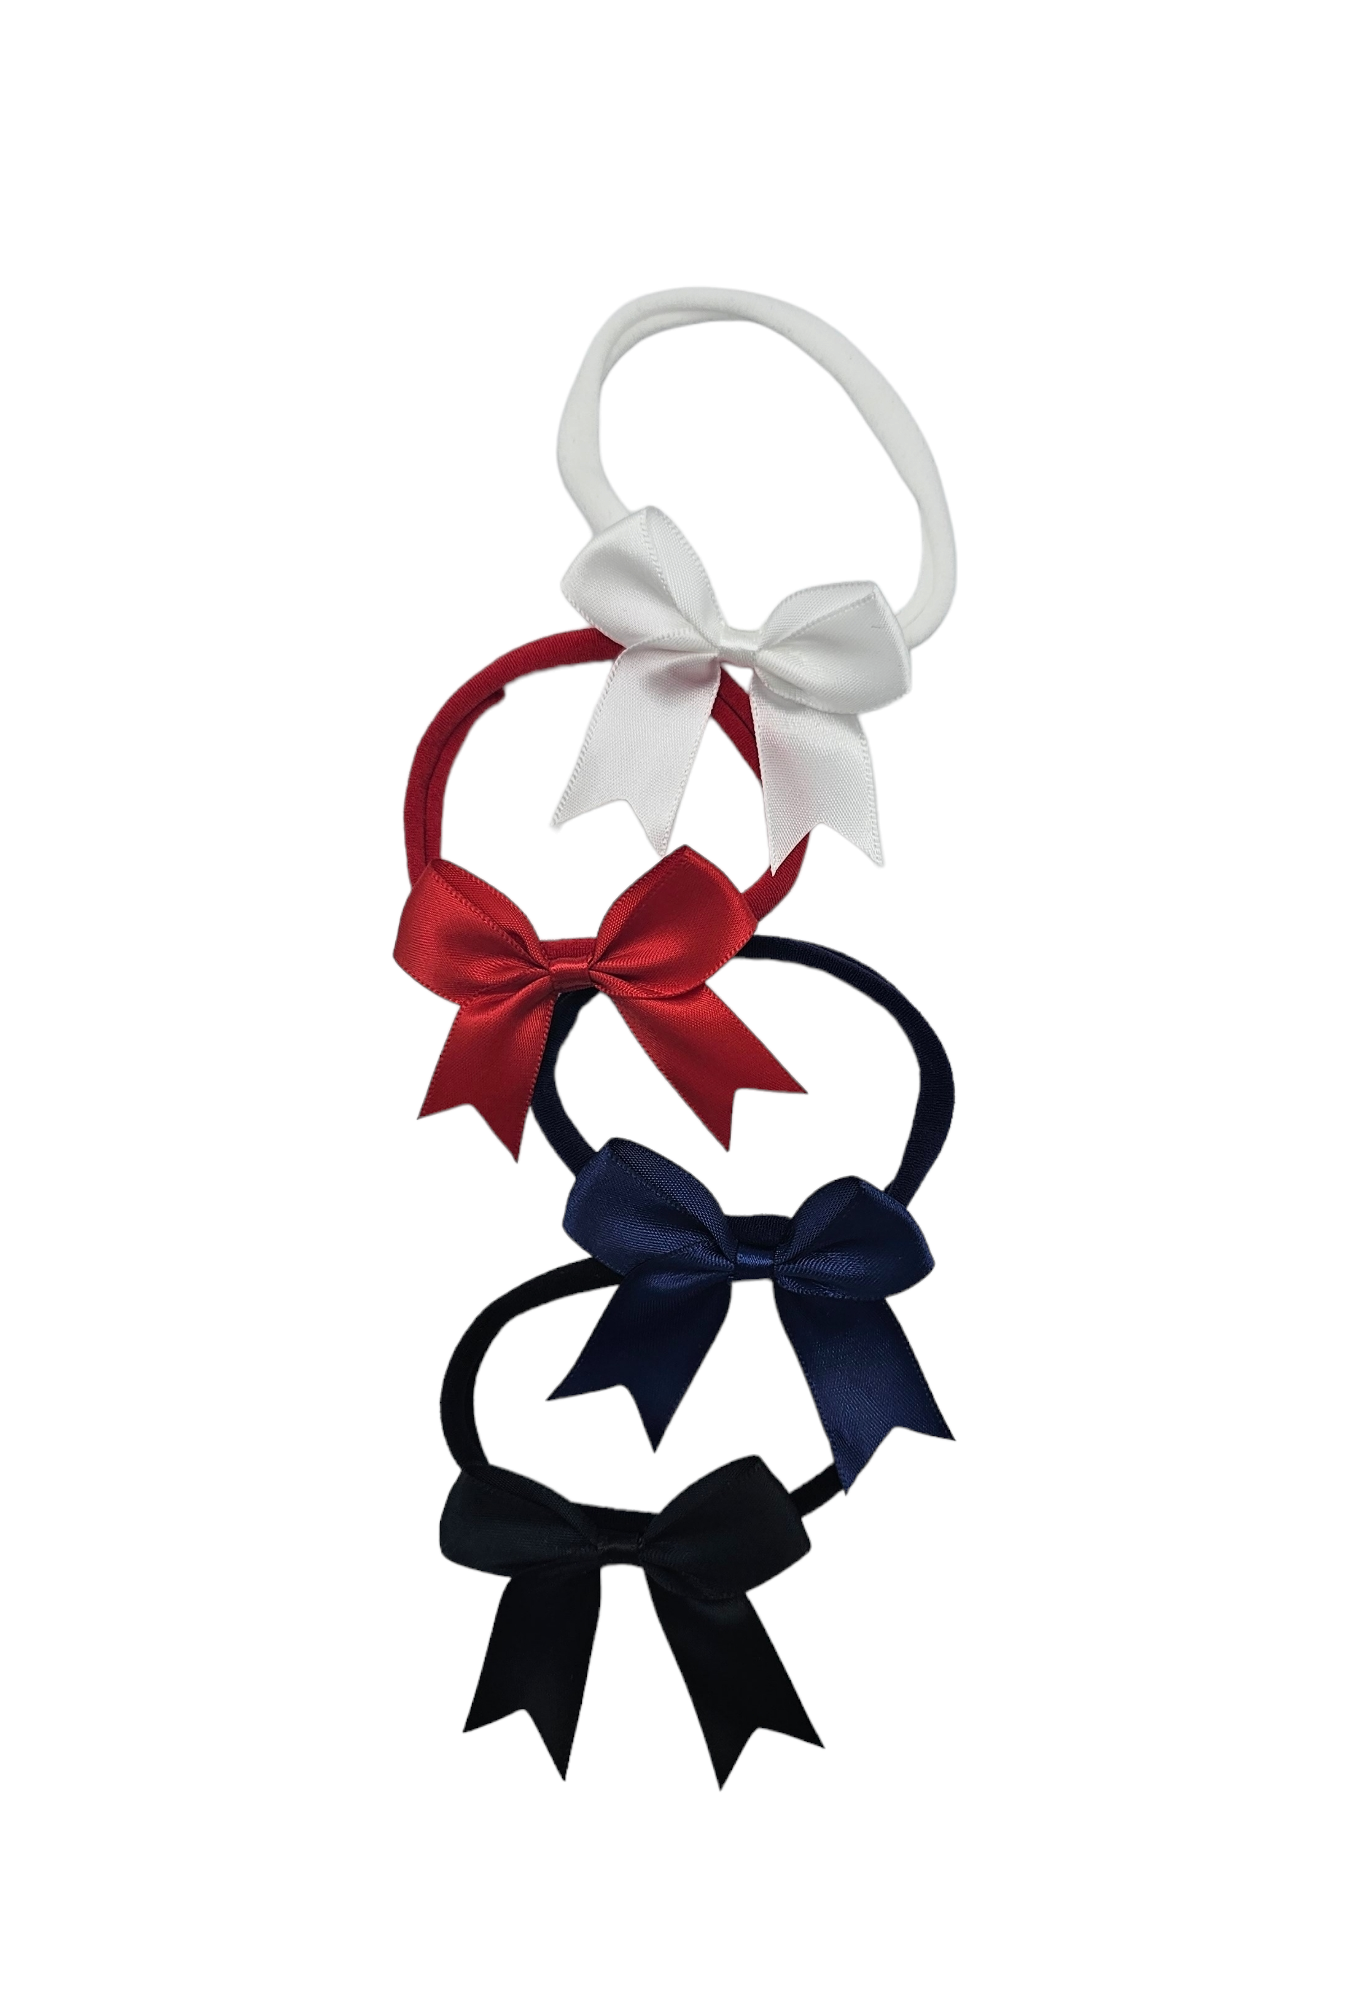 Pack of 4 - 2.5 Inch Satin Kiss Dainty Bow Headbands - Betty Brown Boutique Ltd